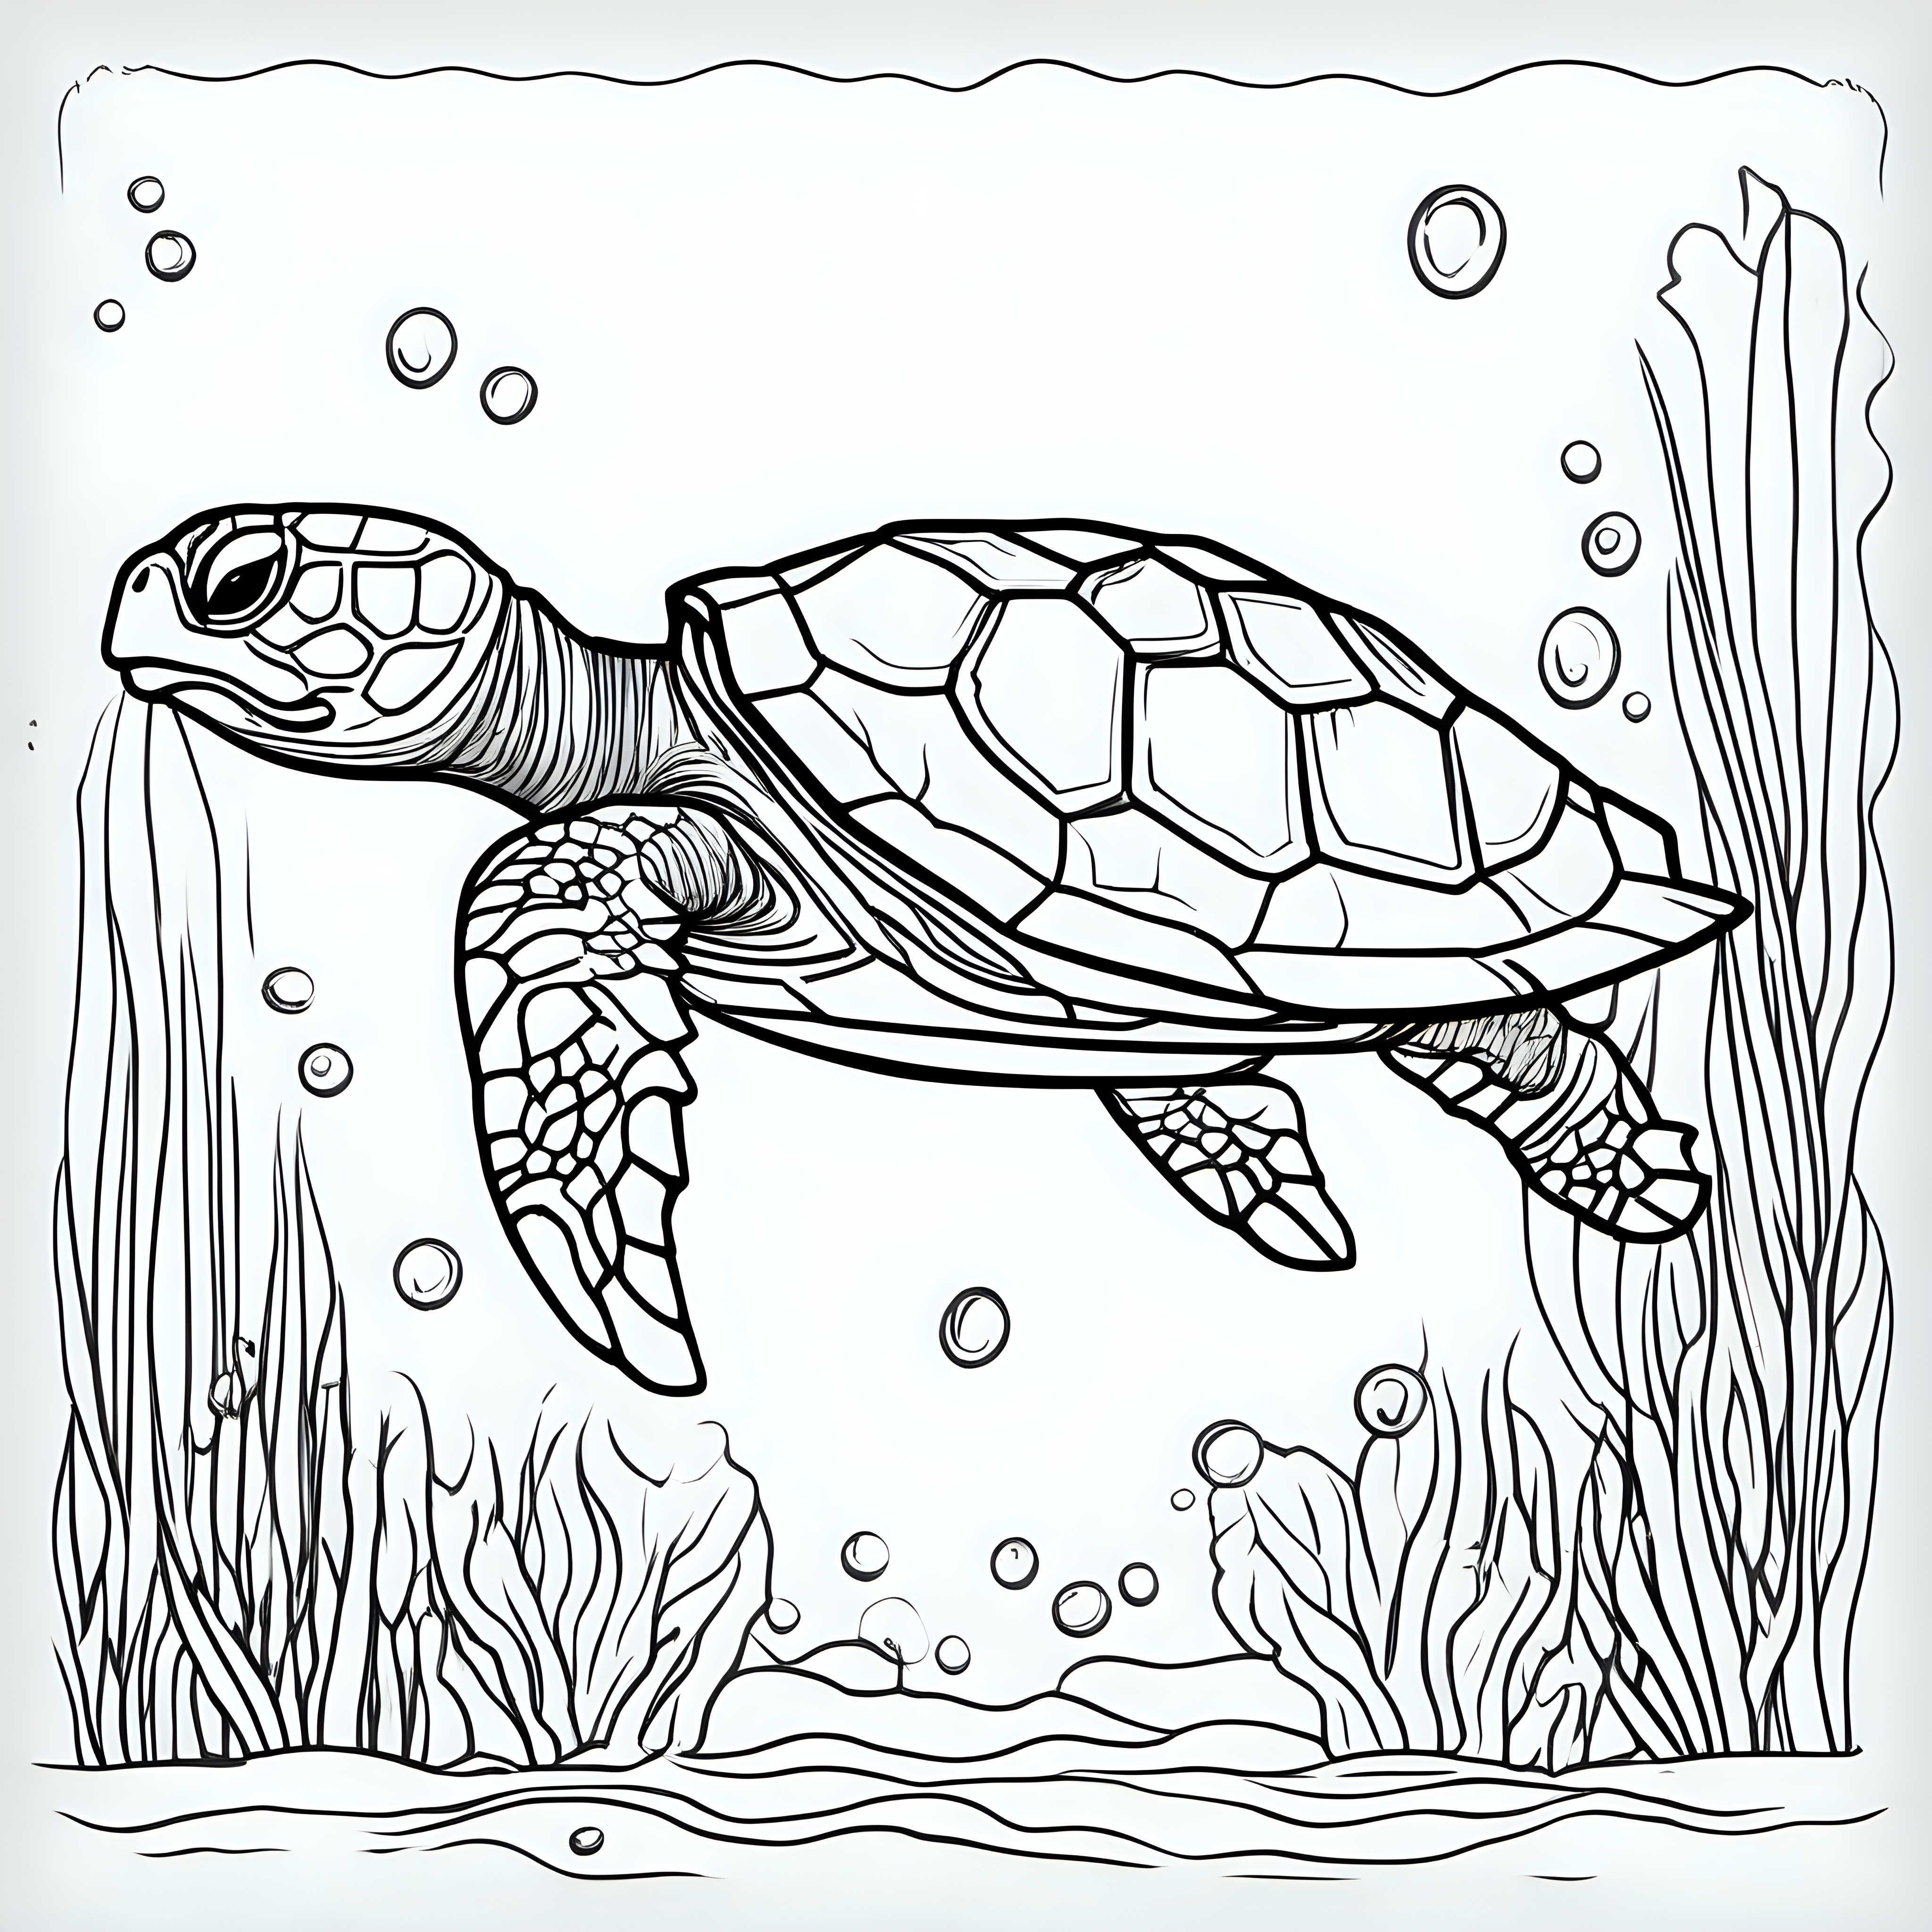 
Craft a whimsical black outline of an adorable turtle, tailor-made for a children's coloring book. Against a simple underwater backdrop, ensure the turtle's features are outlined with a lighter touch, allowing kids to explore their imagination and infuse the illustration with a burst of vibrant colors. The simplicity of the background accentuates the charm of the turtle, creating an engaging canvas for children to bring their creative flair to life.